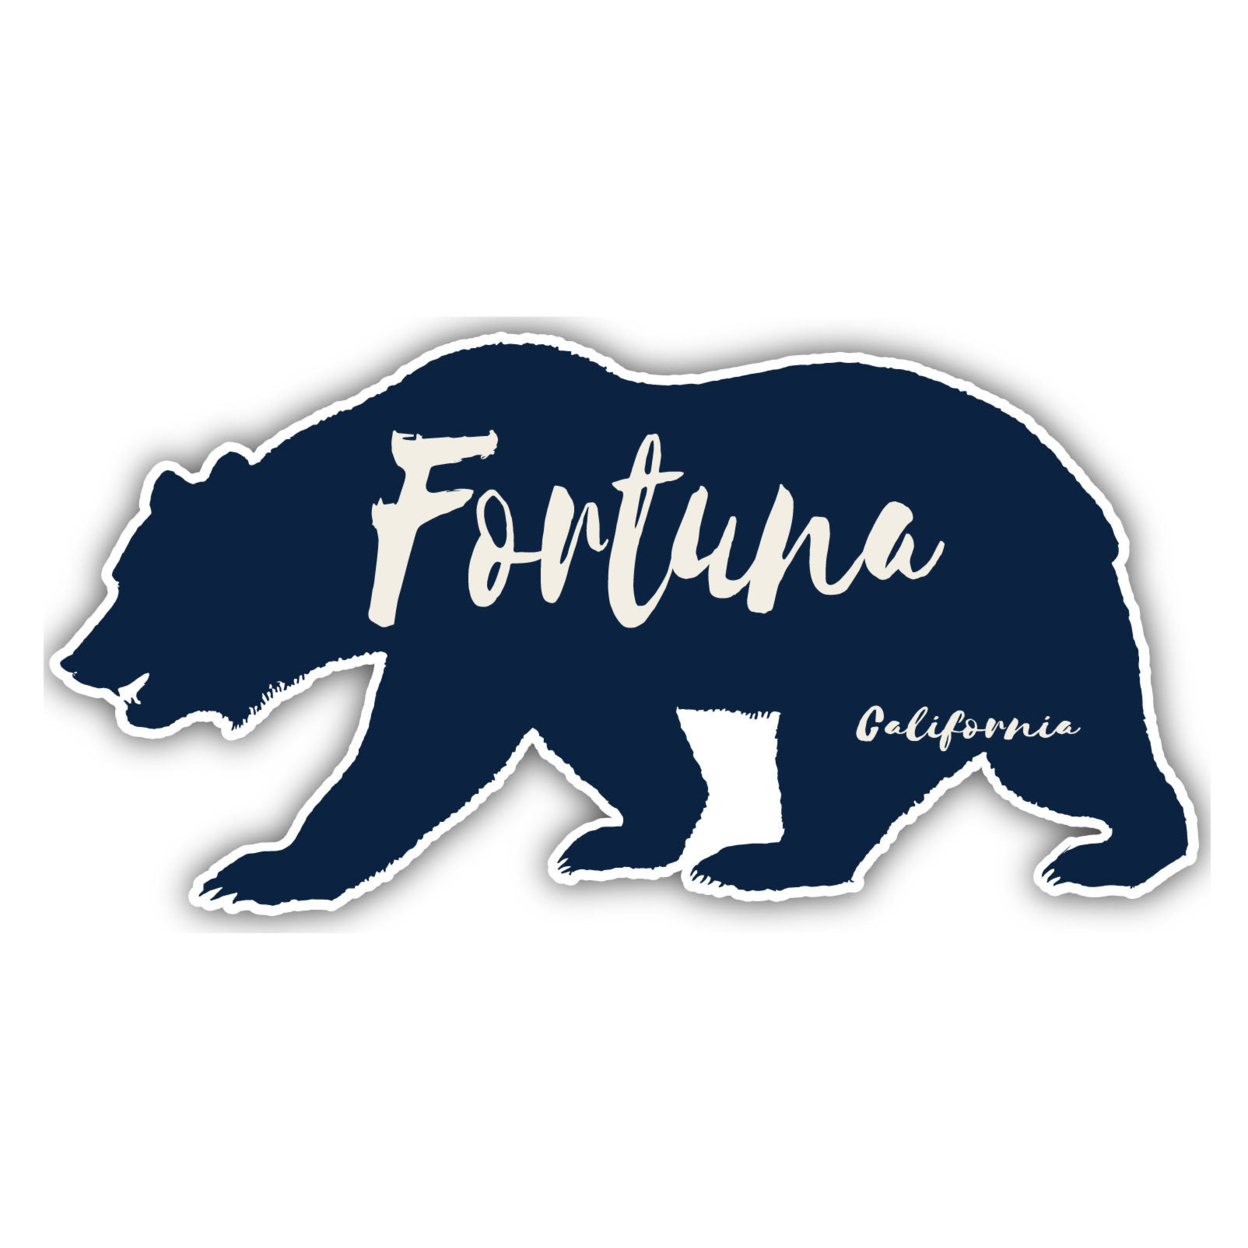 Fortuna California Souvenir Decorative Stickers (Choose Theme And Size) - 4-Pack, 2-Inch, Camp Life